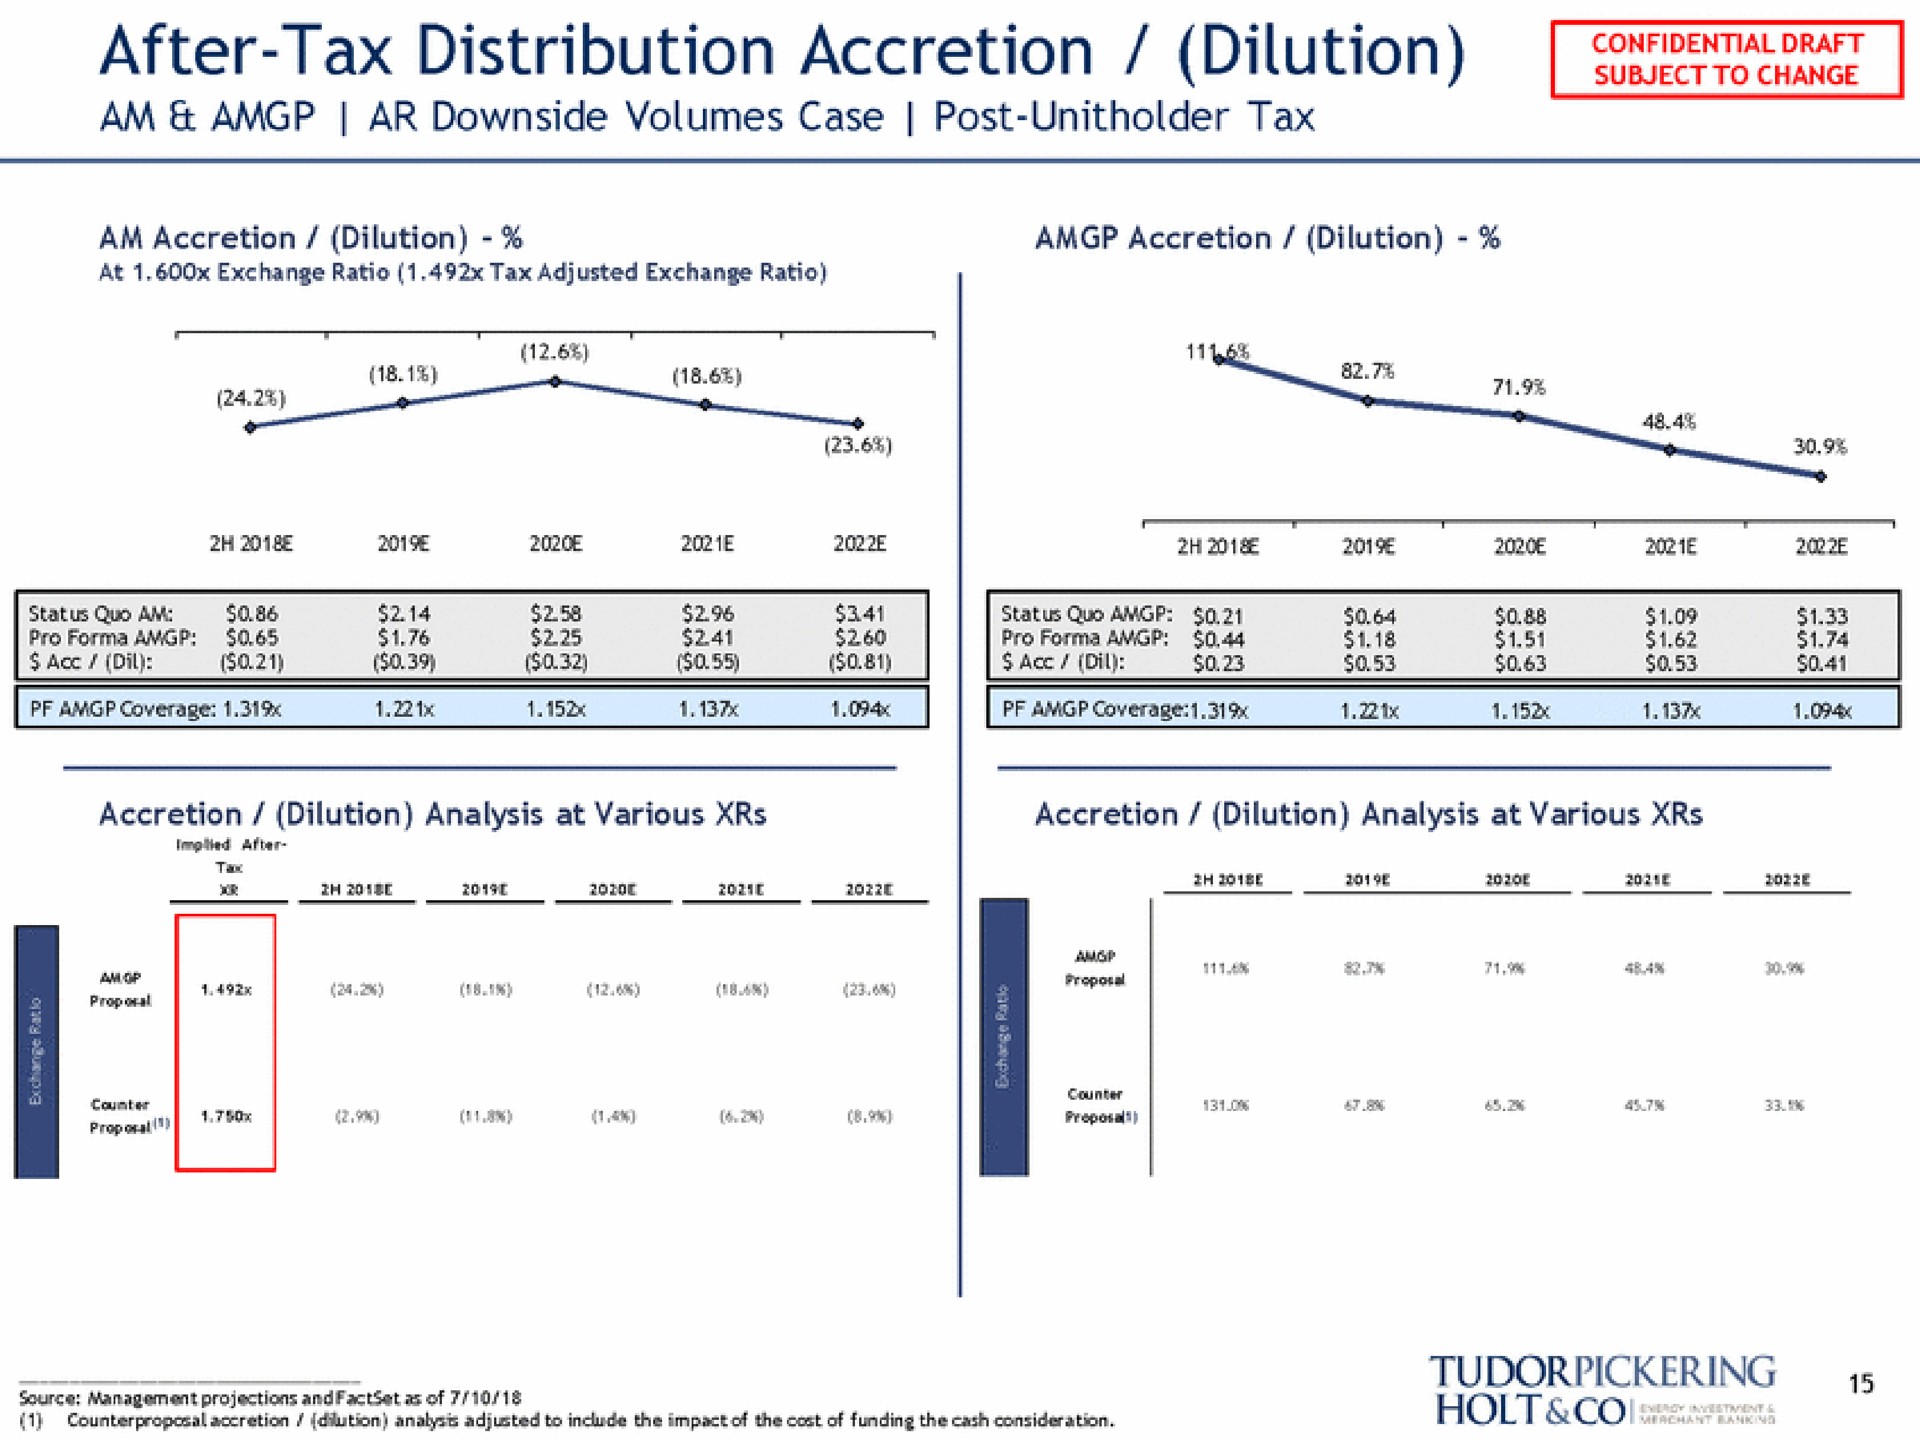 after tax distribution accretion dilution subject to change holt coo | Tudor, Pickering, Holt & Co